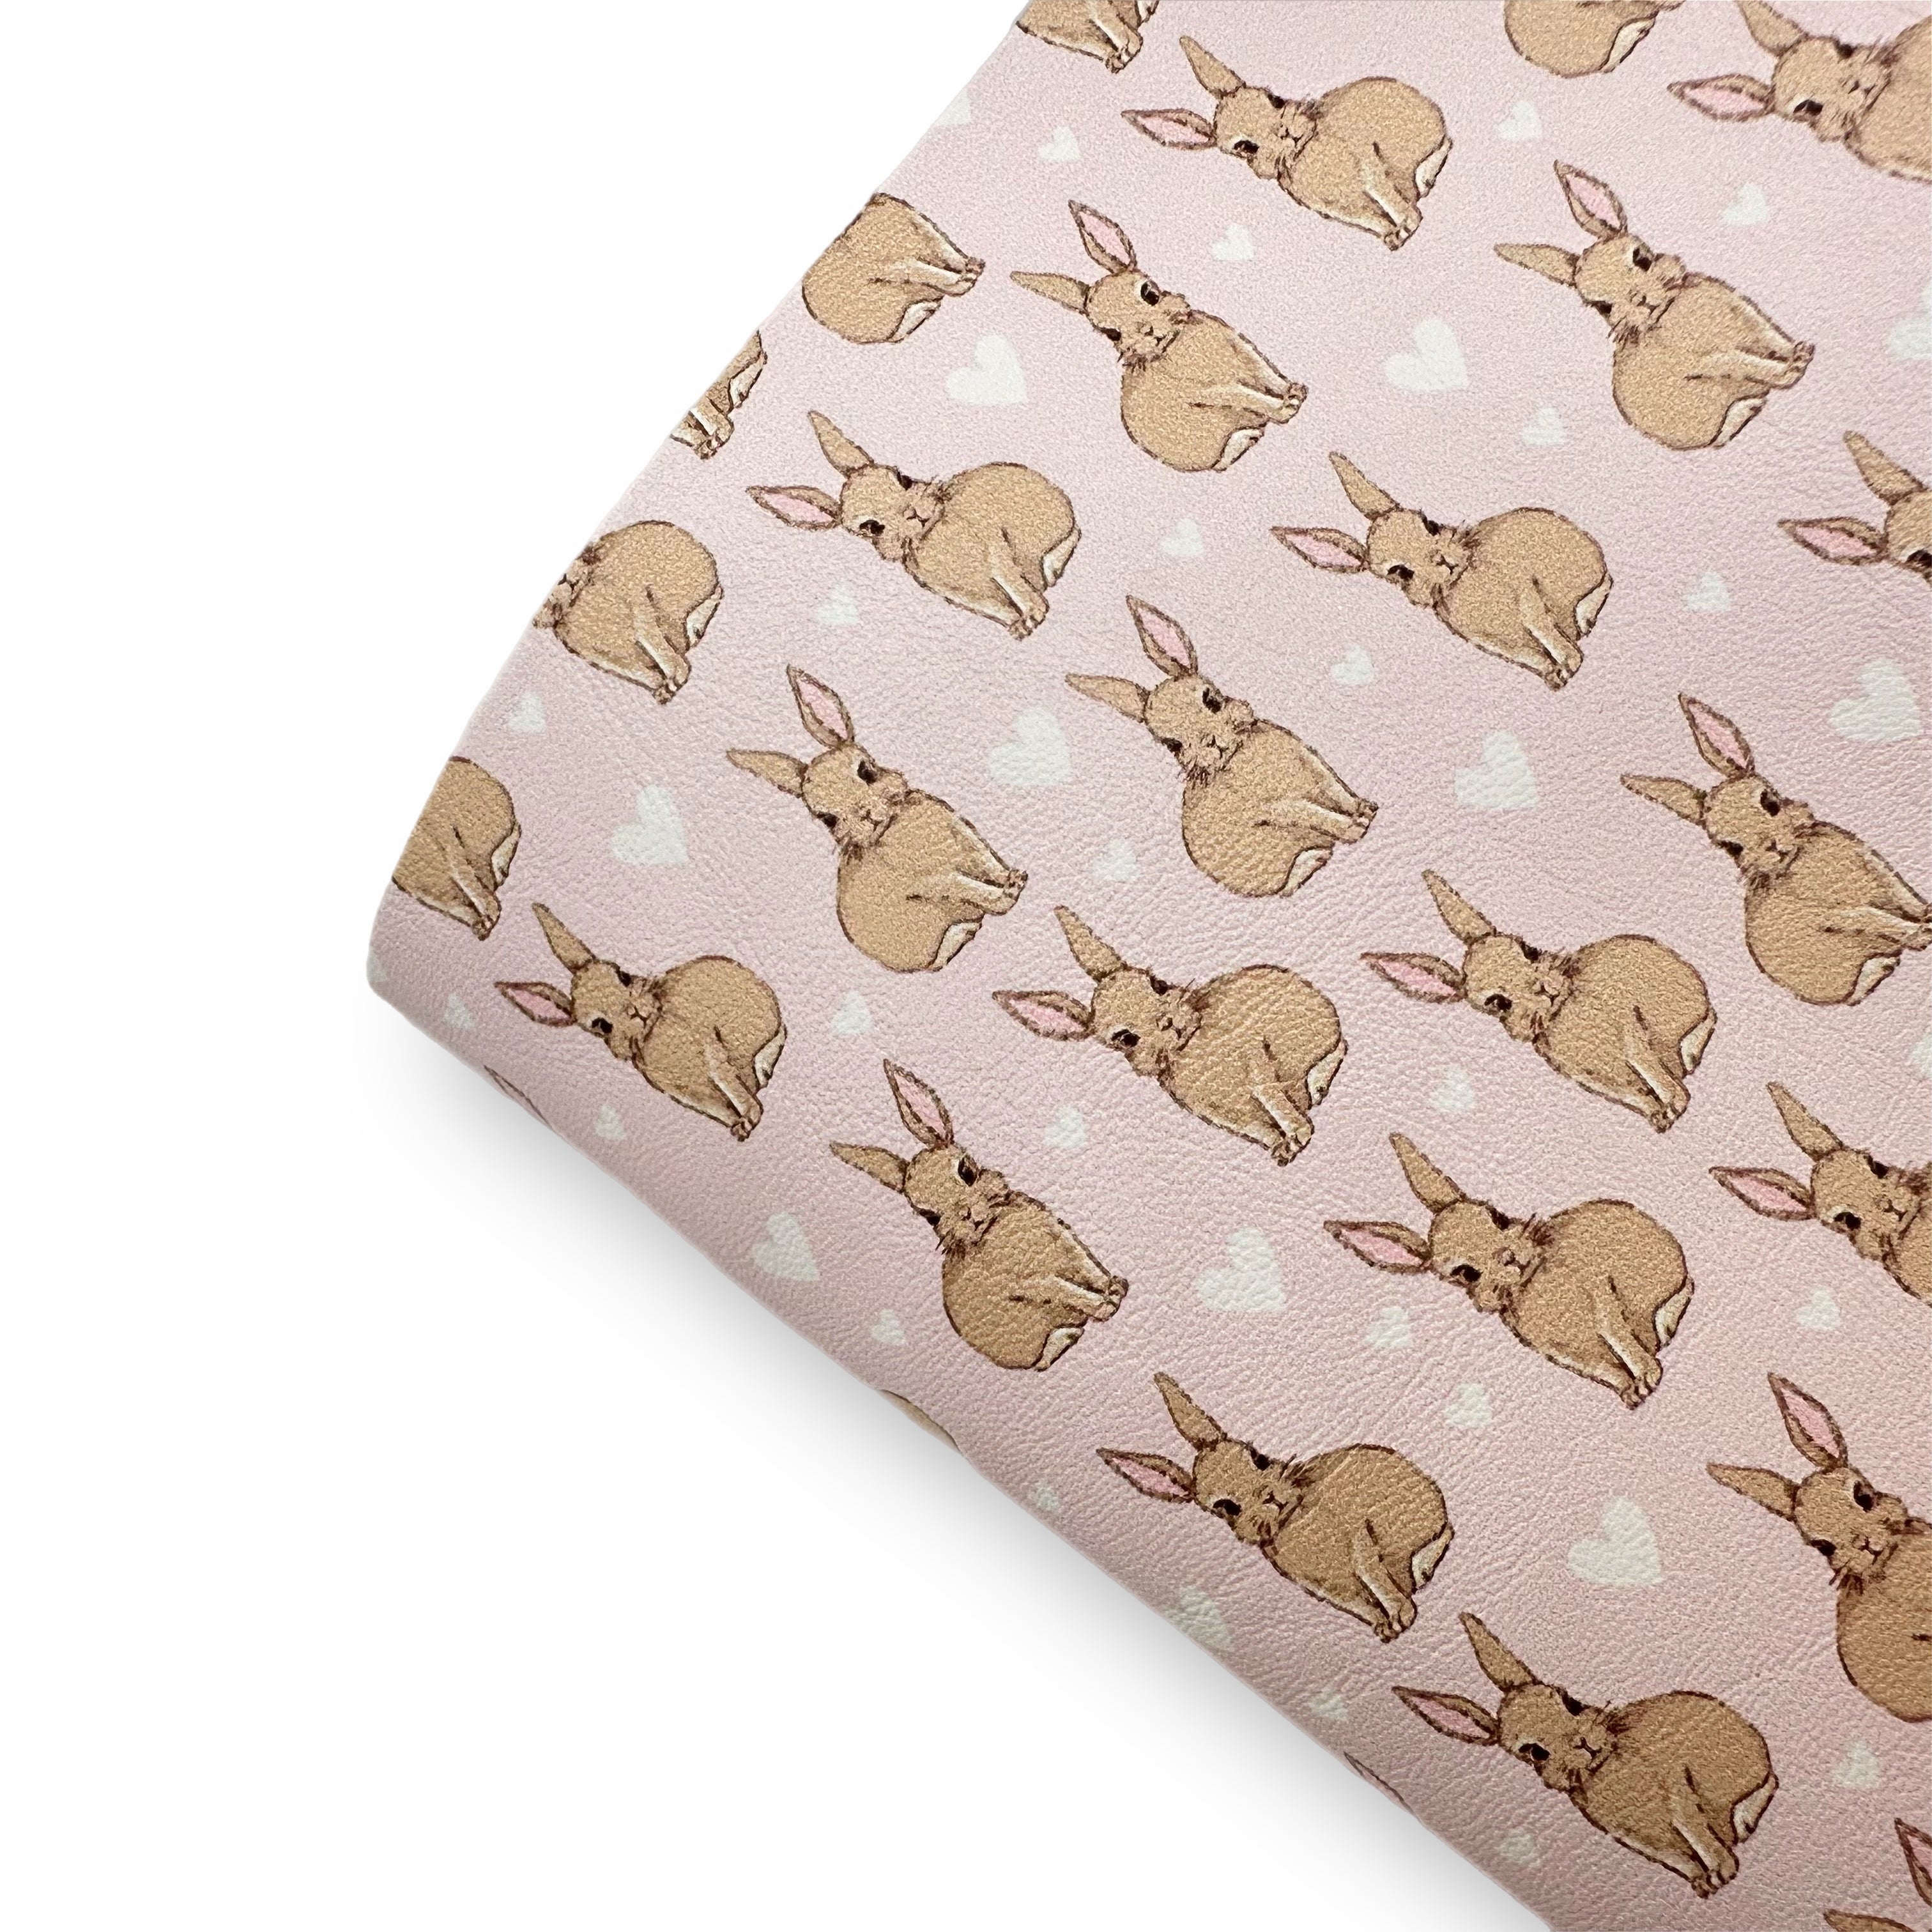 Little Brown Bunny Premium Faux Leather Fabric